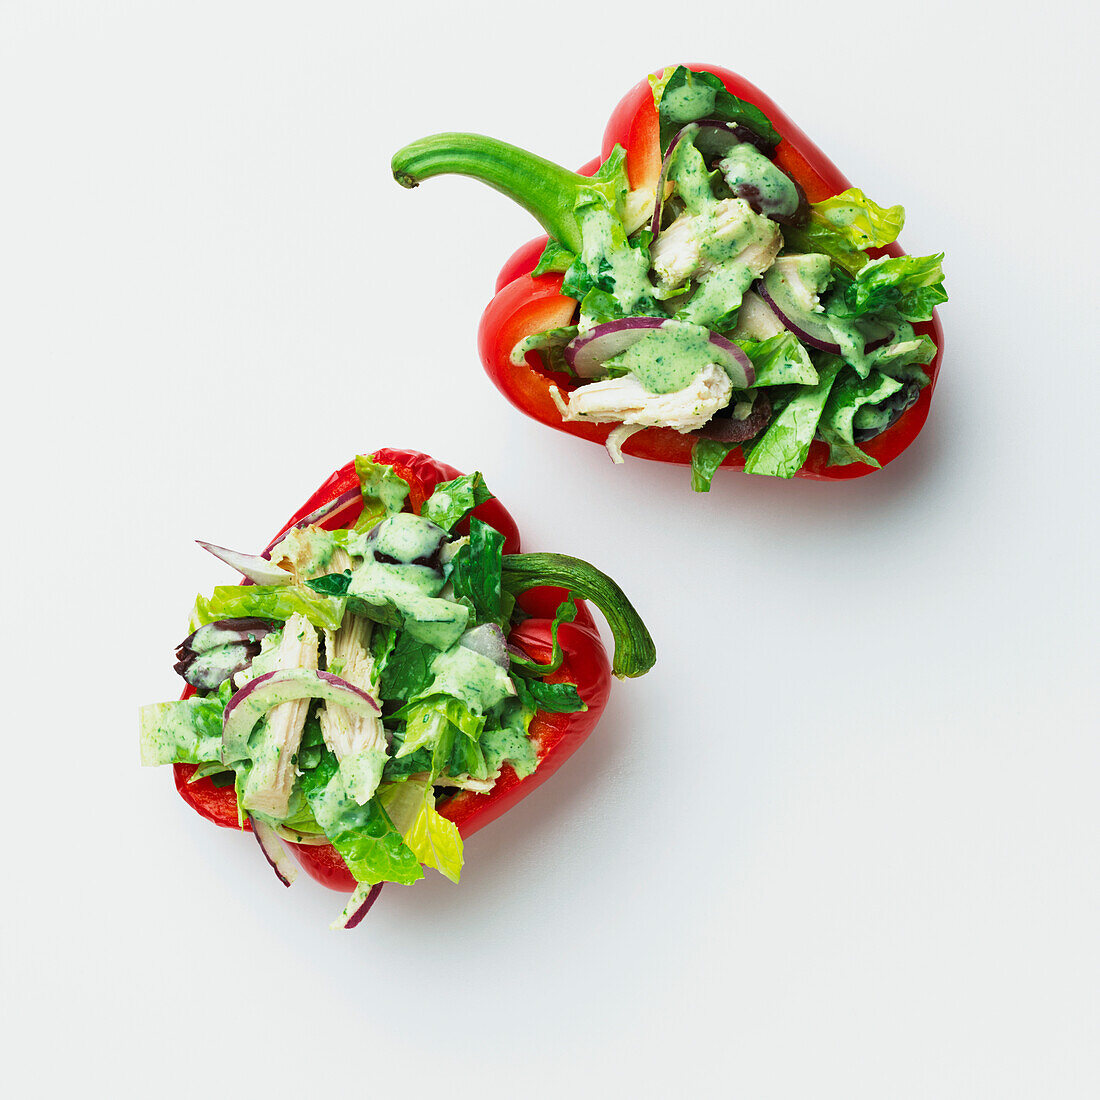 Red peppers stuffed with salad